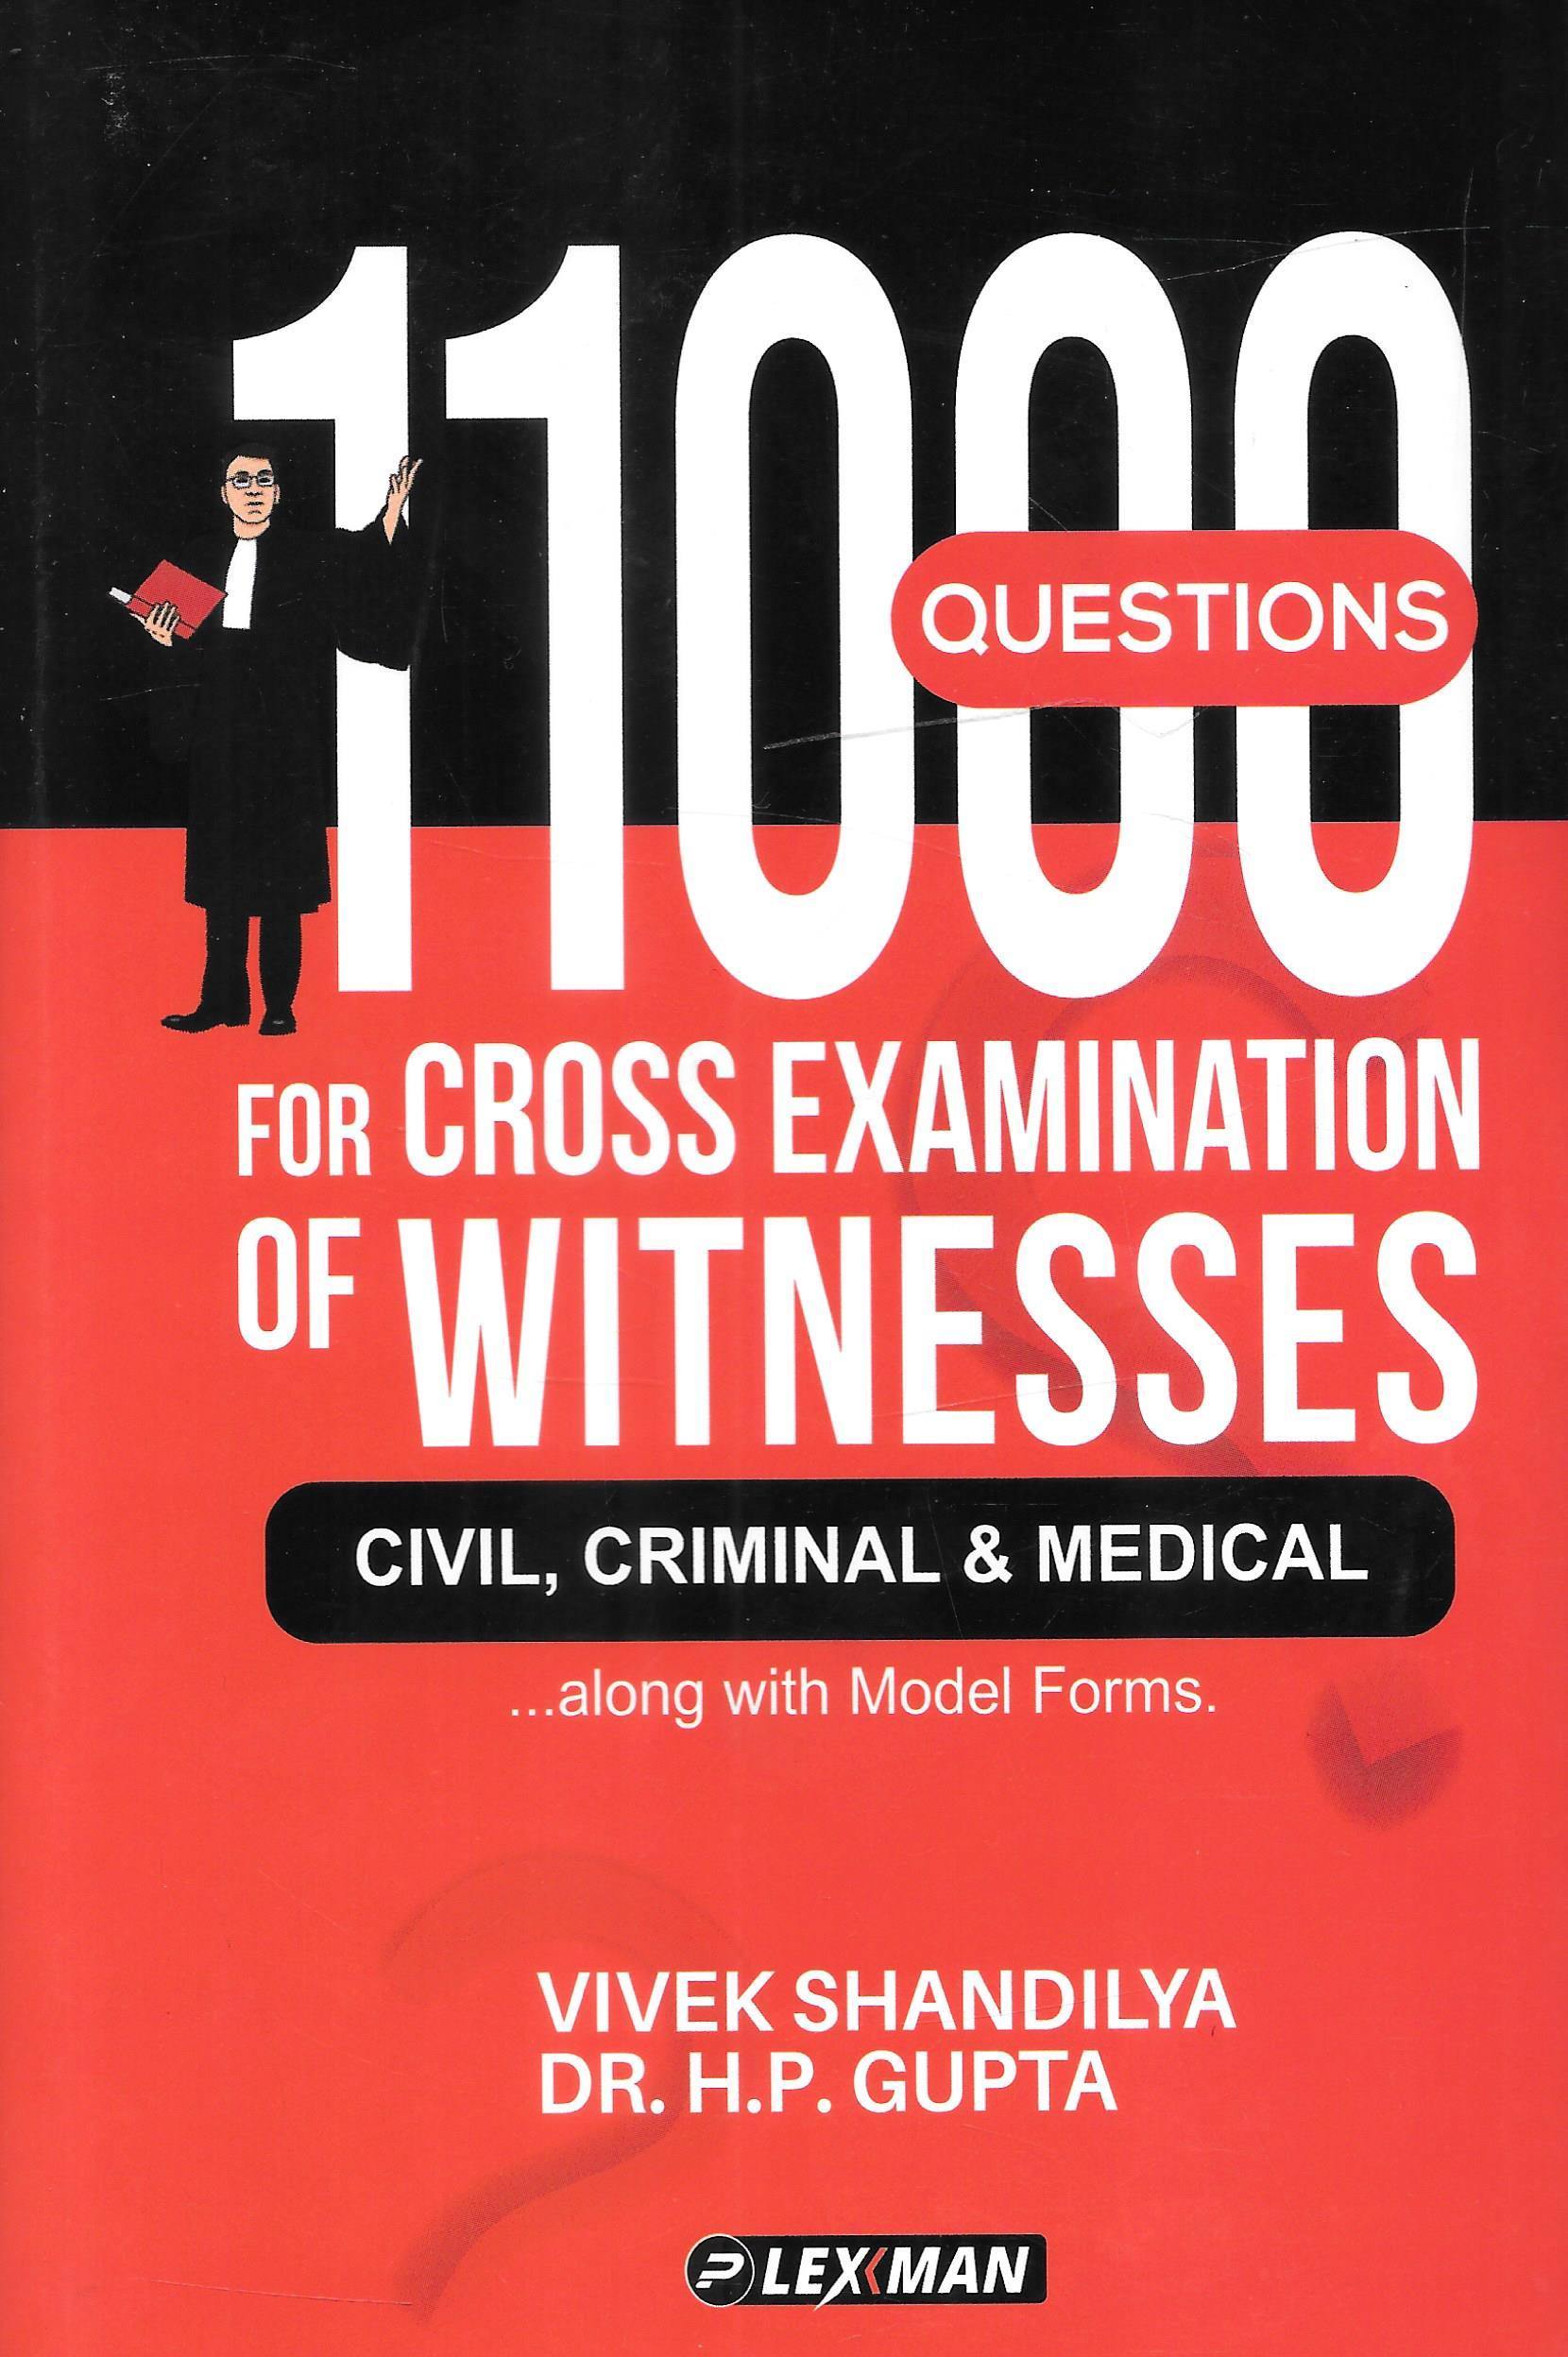 11000 Questions for Cross Examination of Witnesses (Civil, Criminal and Medical)